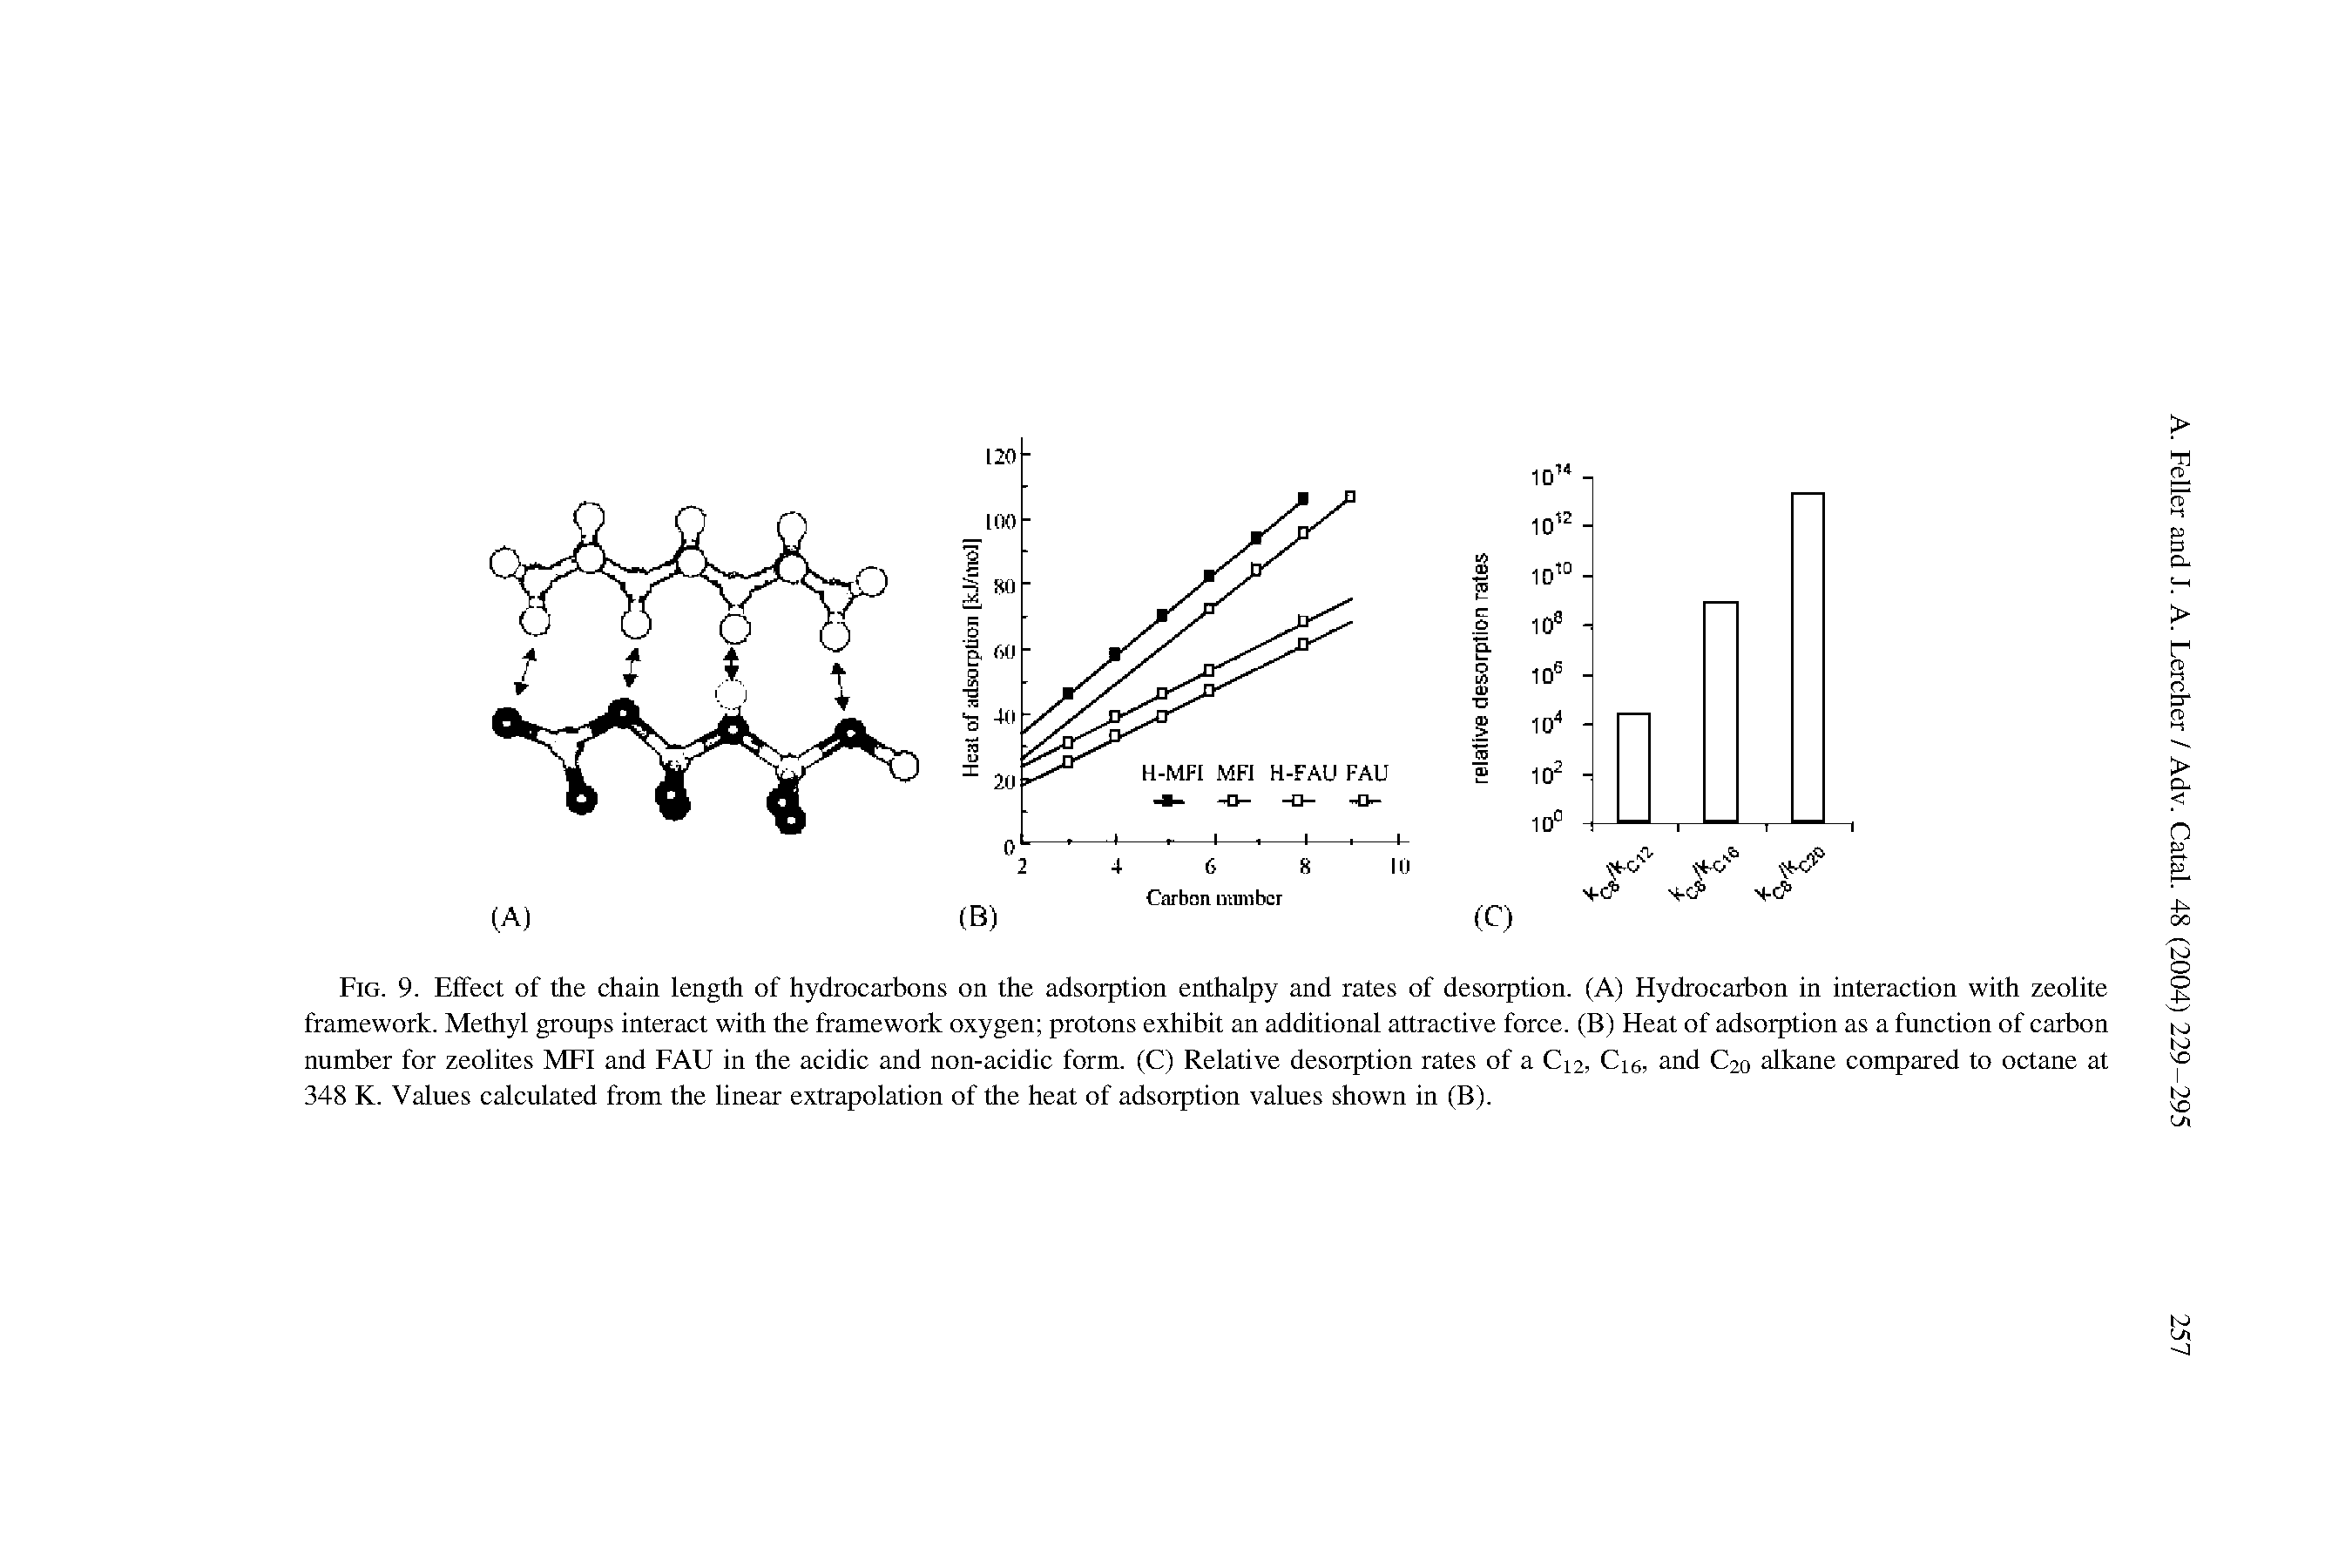 Fig. 9. Effect of the chain length of hydrocarbons on the adsorption enthalpy and rates of desorption. (A) Hydrocarbon in interaction with zeolite framework. Methyl groups interact with the framework oxygen protons exhibit an additional attractive force. (B) Heat of adsorption as a function of carbon number for zeolites MFI and FAU in the acidic and non-acidic form. (C) Relative desorption rates of a C12, Ci6, and C20 alkane compared to octane at 348 K. Values calculated from the linear extrapolation of the heat of adsorption values shown in (B).